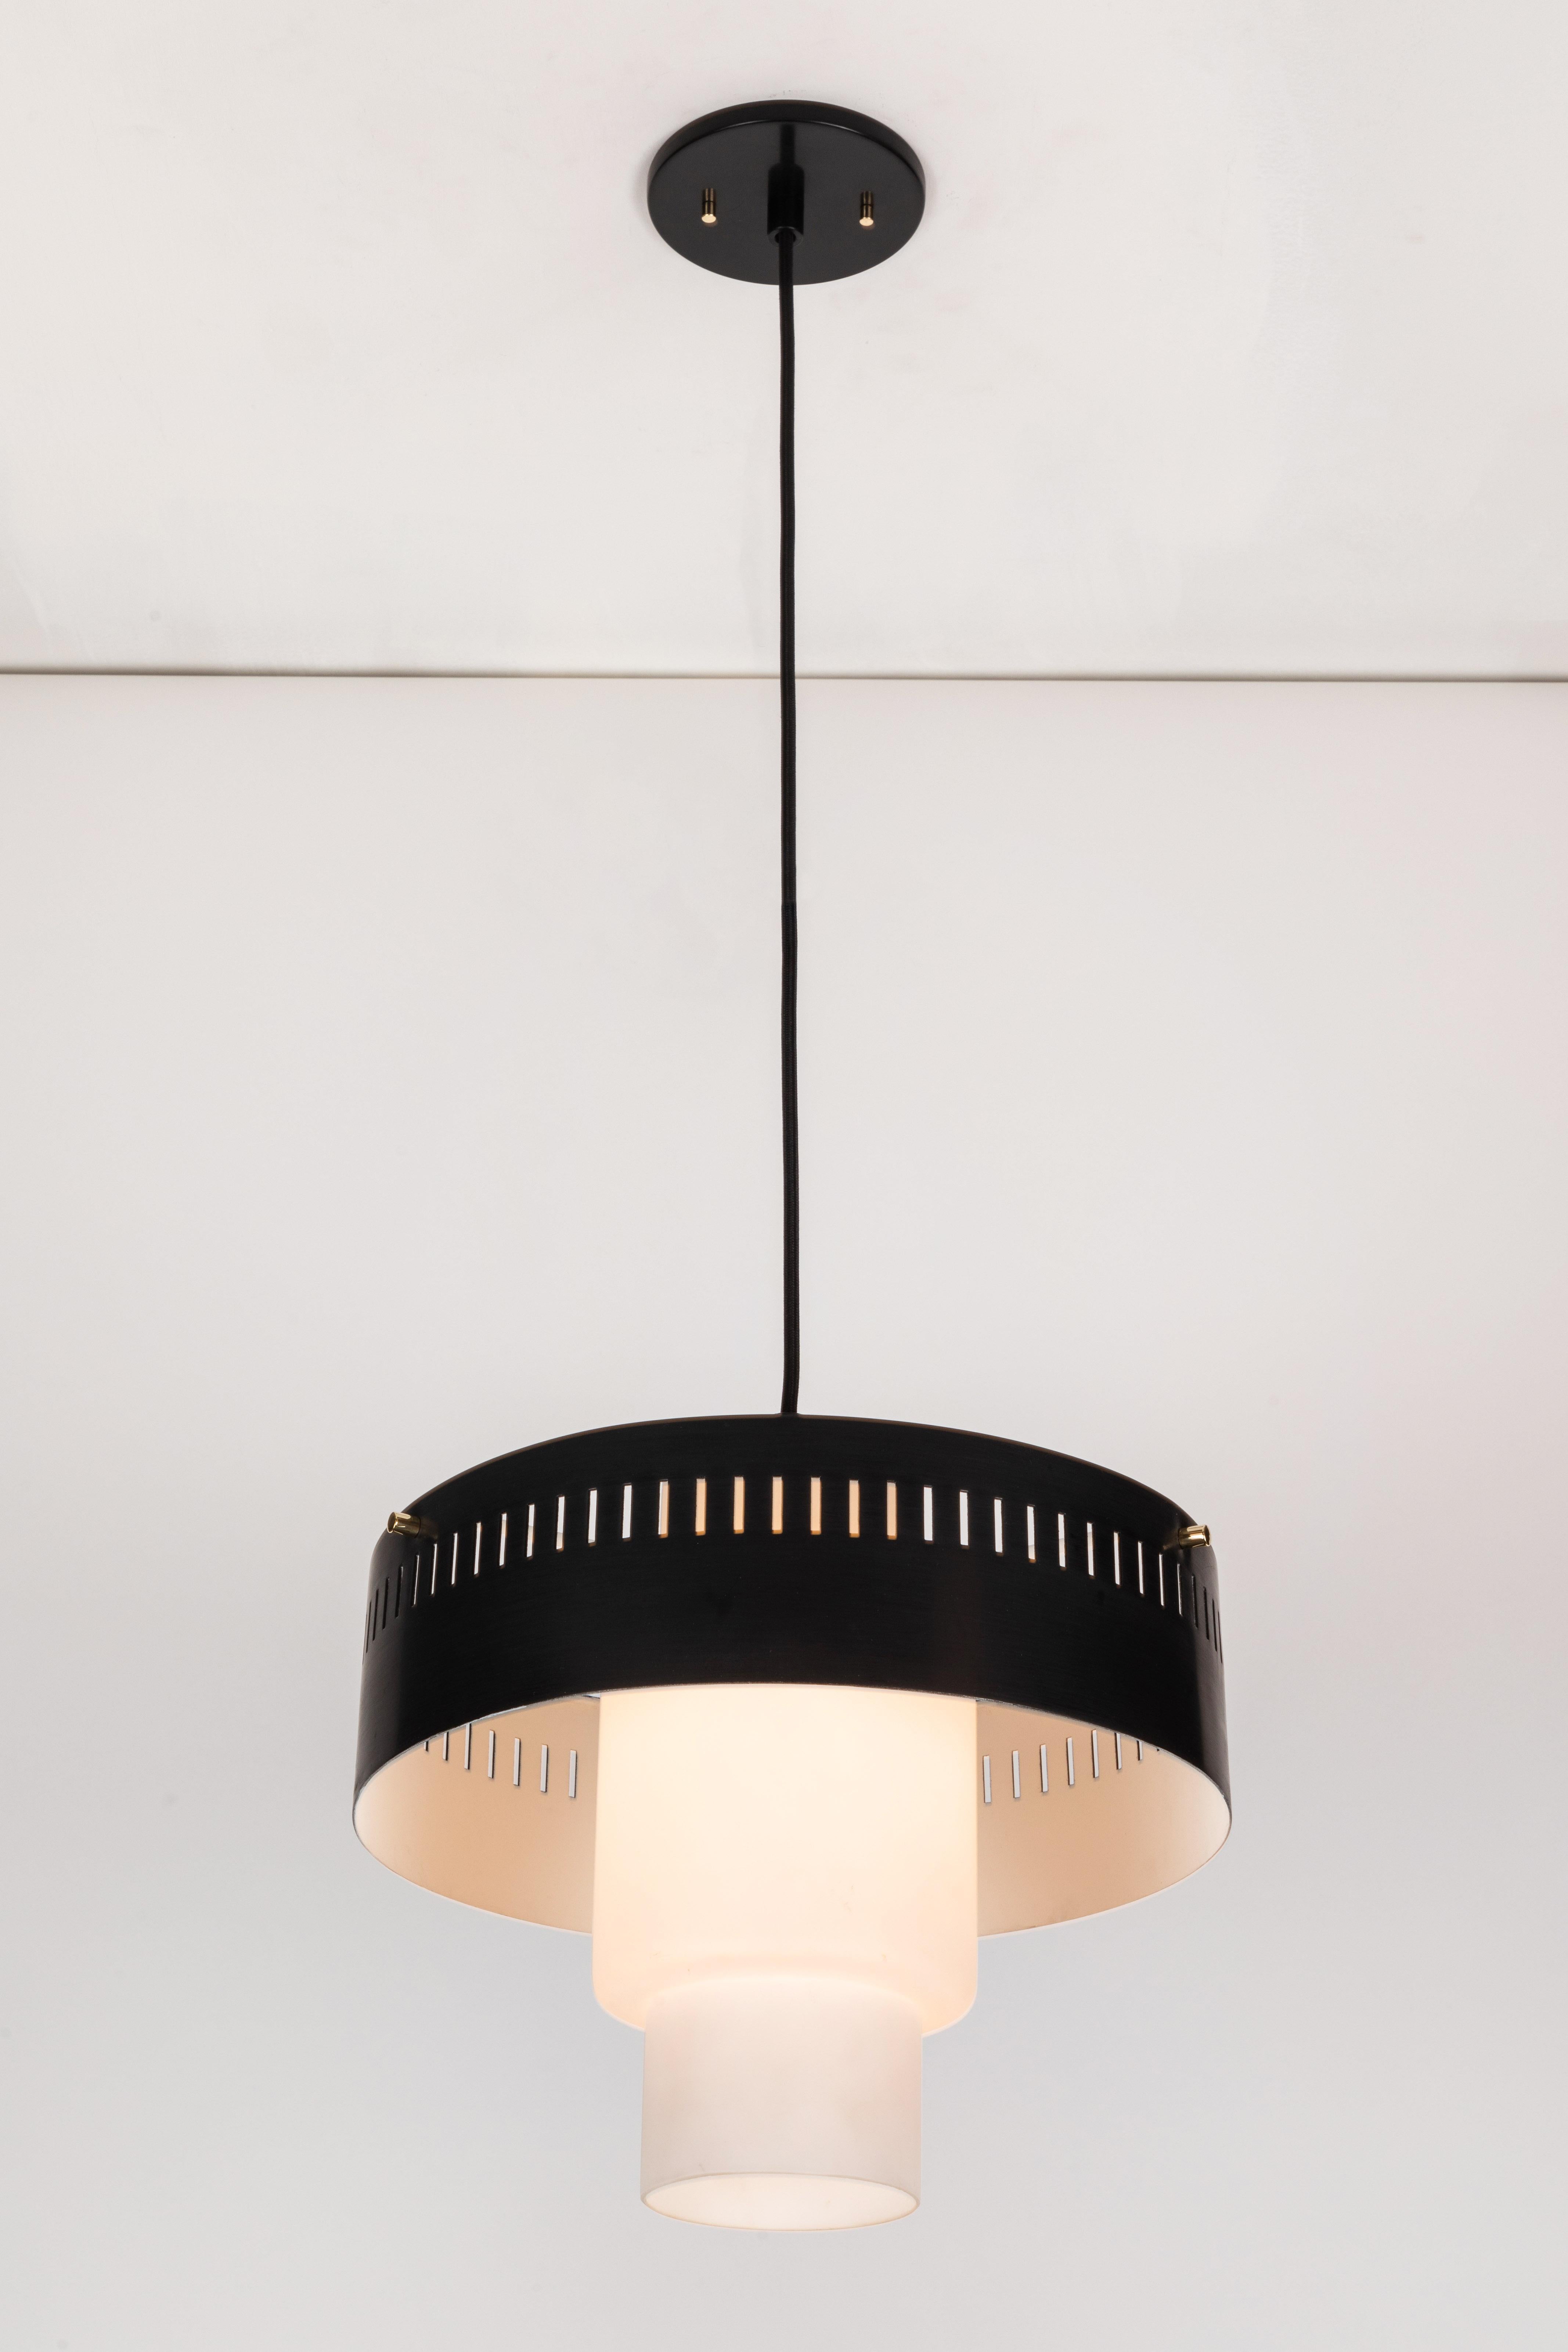 1950s brass and glass suspension light attributed to Bruno Gatta for Stilnovo. A quintessentially 1950s Italian design executed in textured opaline glass, black painted metal and patinated brass with original ceiling canopy modified for mounting